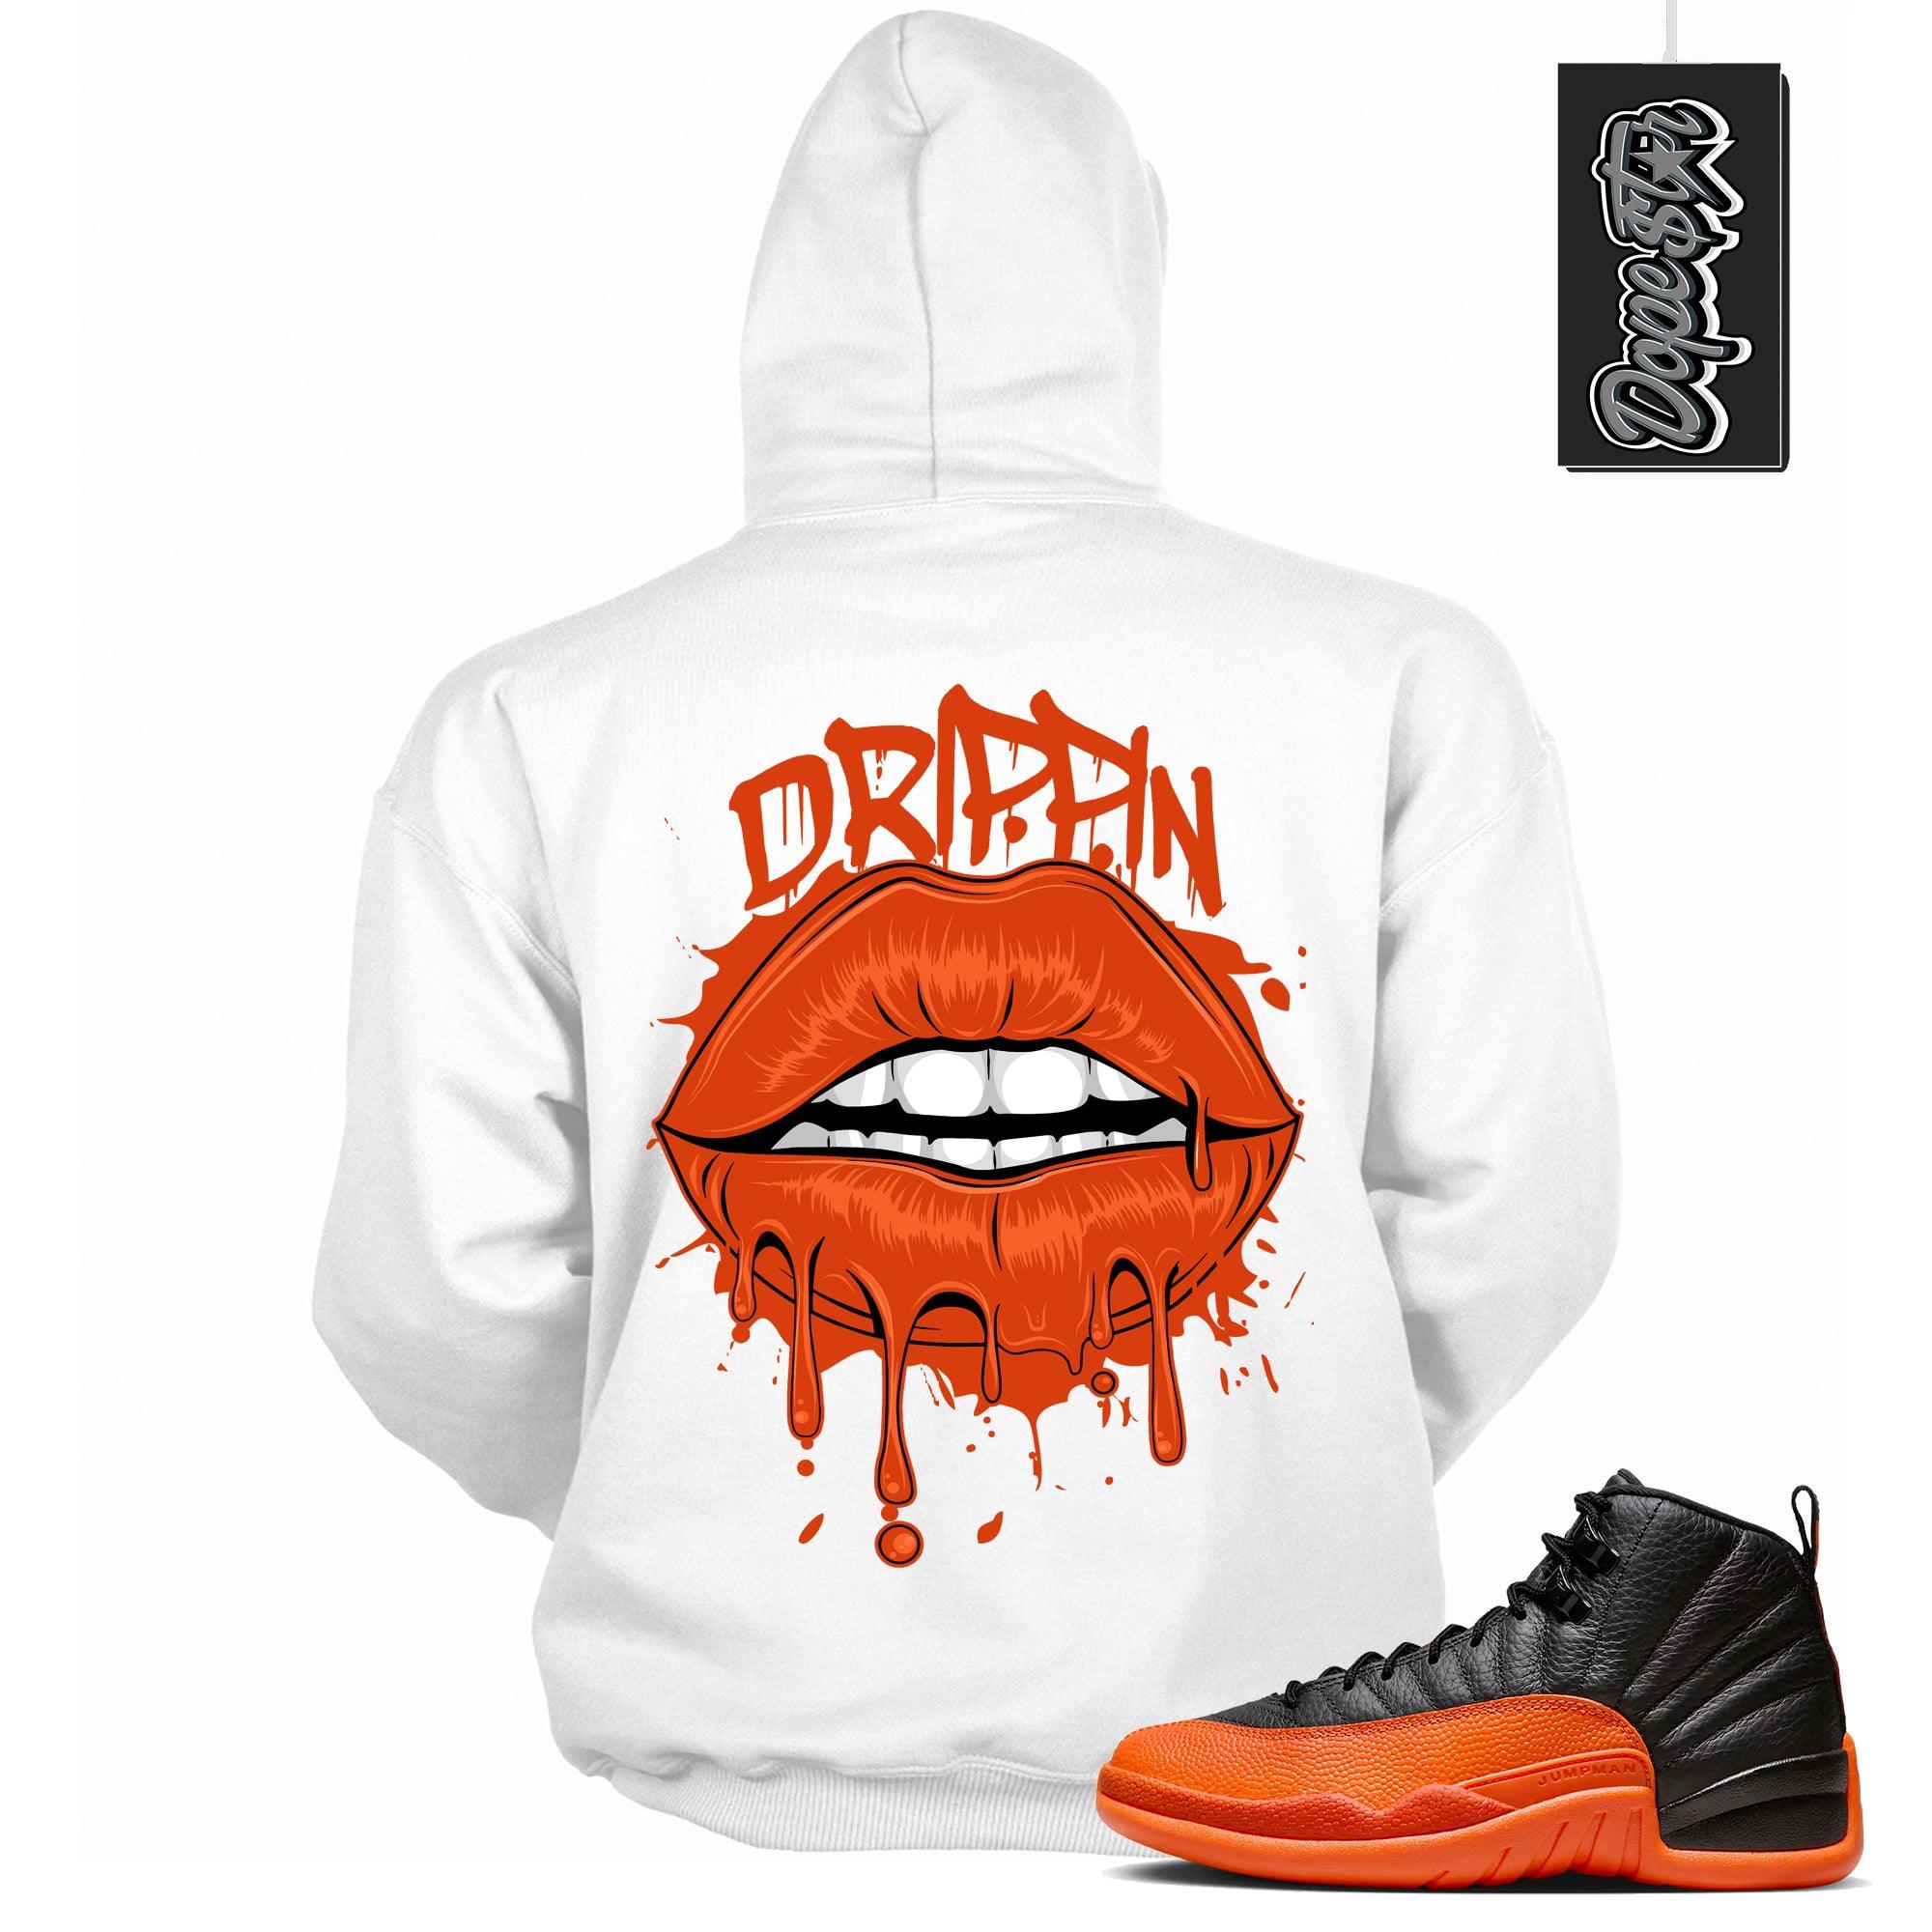 Cool White Graphic Hoodie with “ Drippin Lips “ print, that perfectly matches Air Jordan 12 Retro WNBA All-Star Brilliant Orange  sneakers